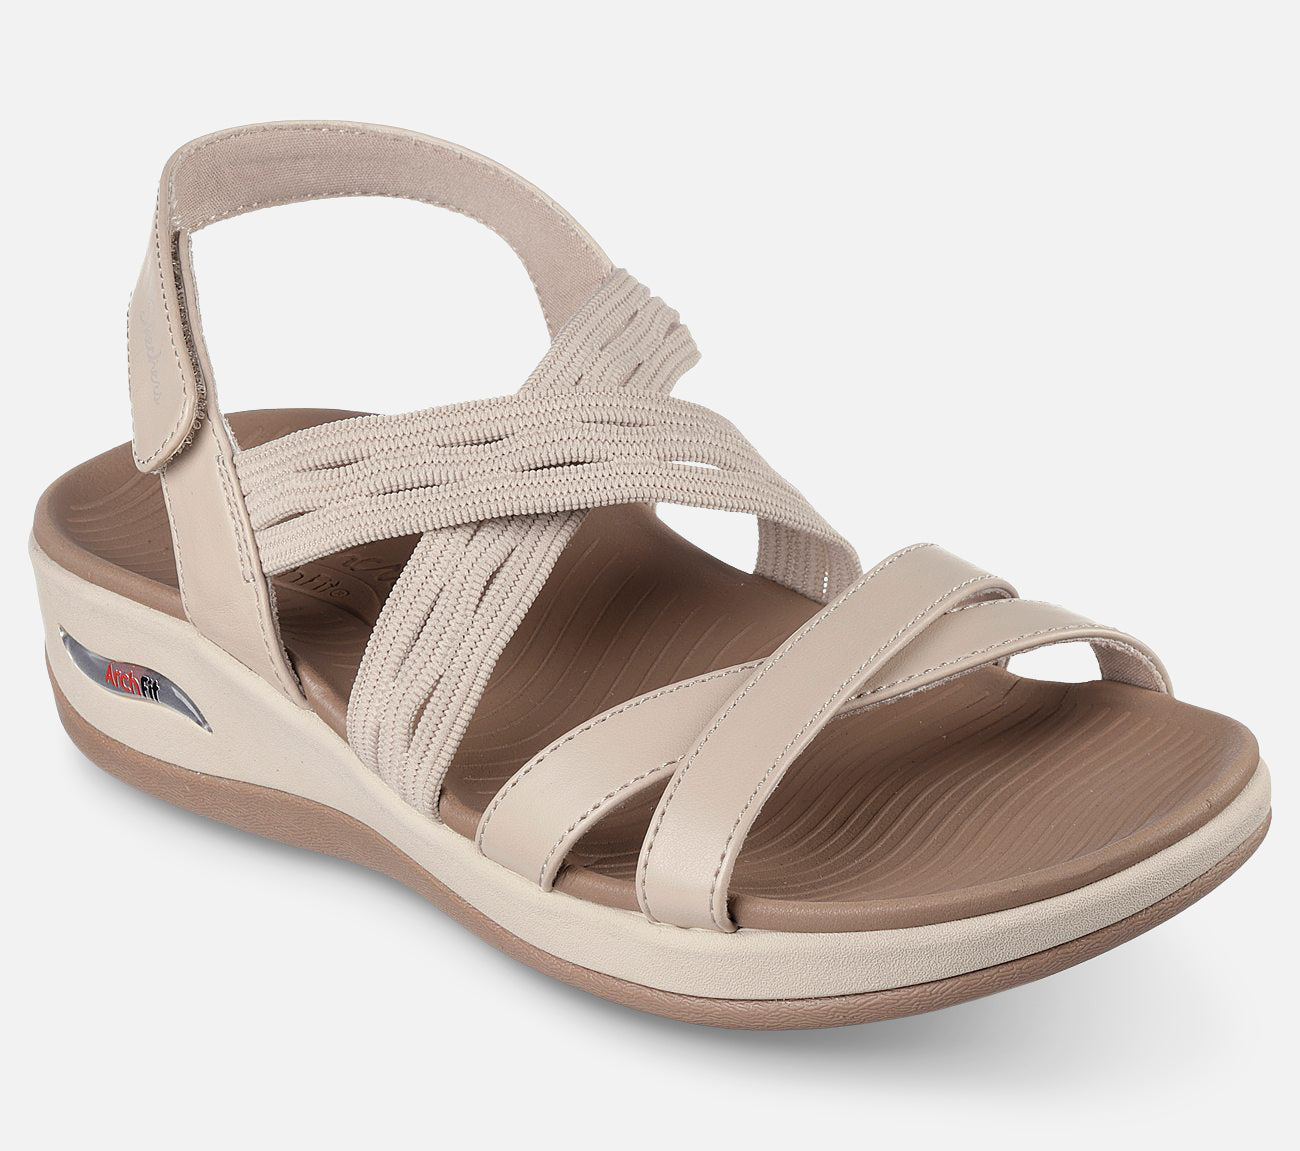 Arch Fit Sunshine - Luxe Lady Sandal Skechers